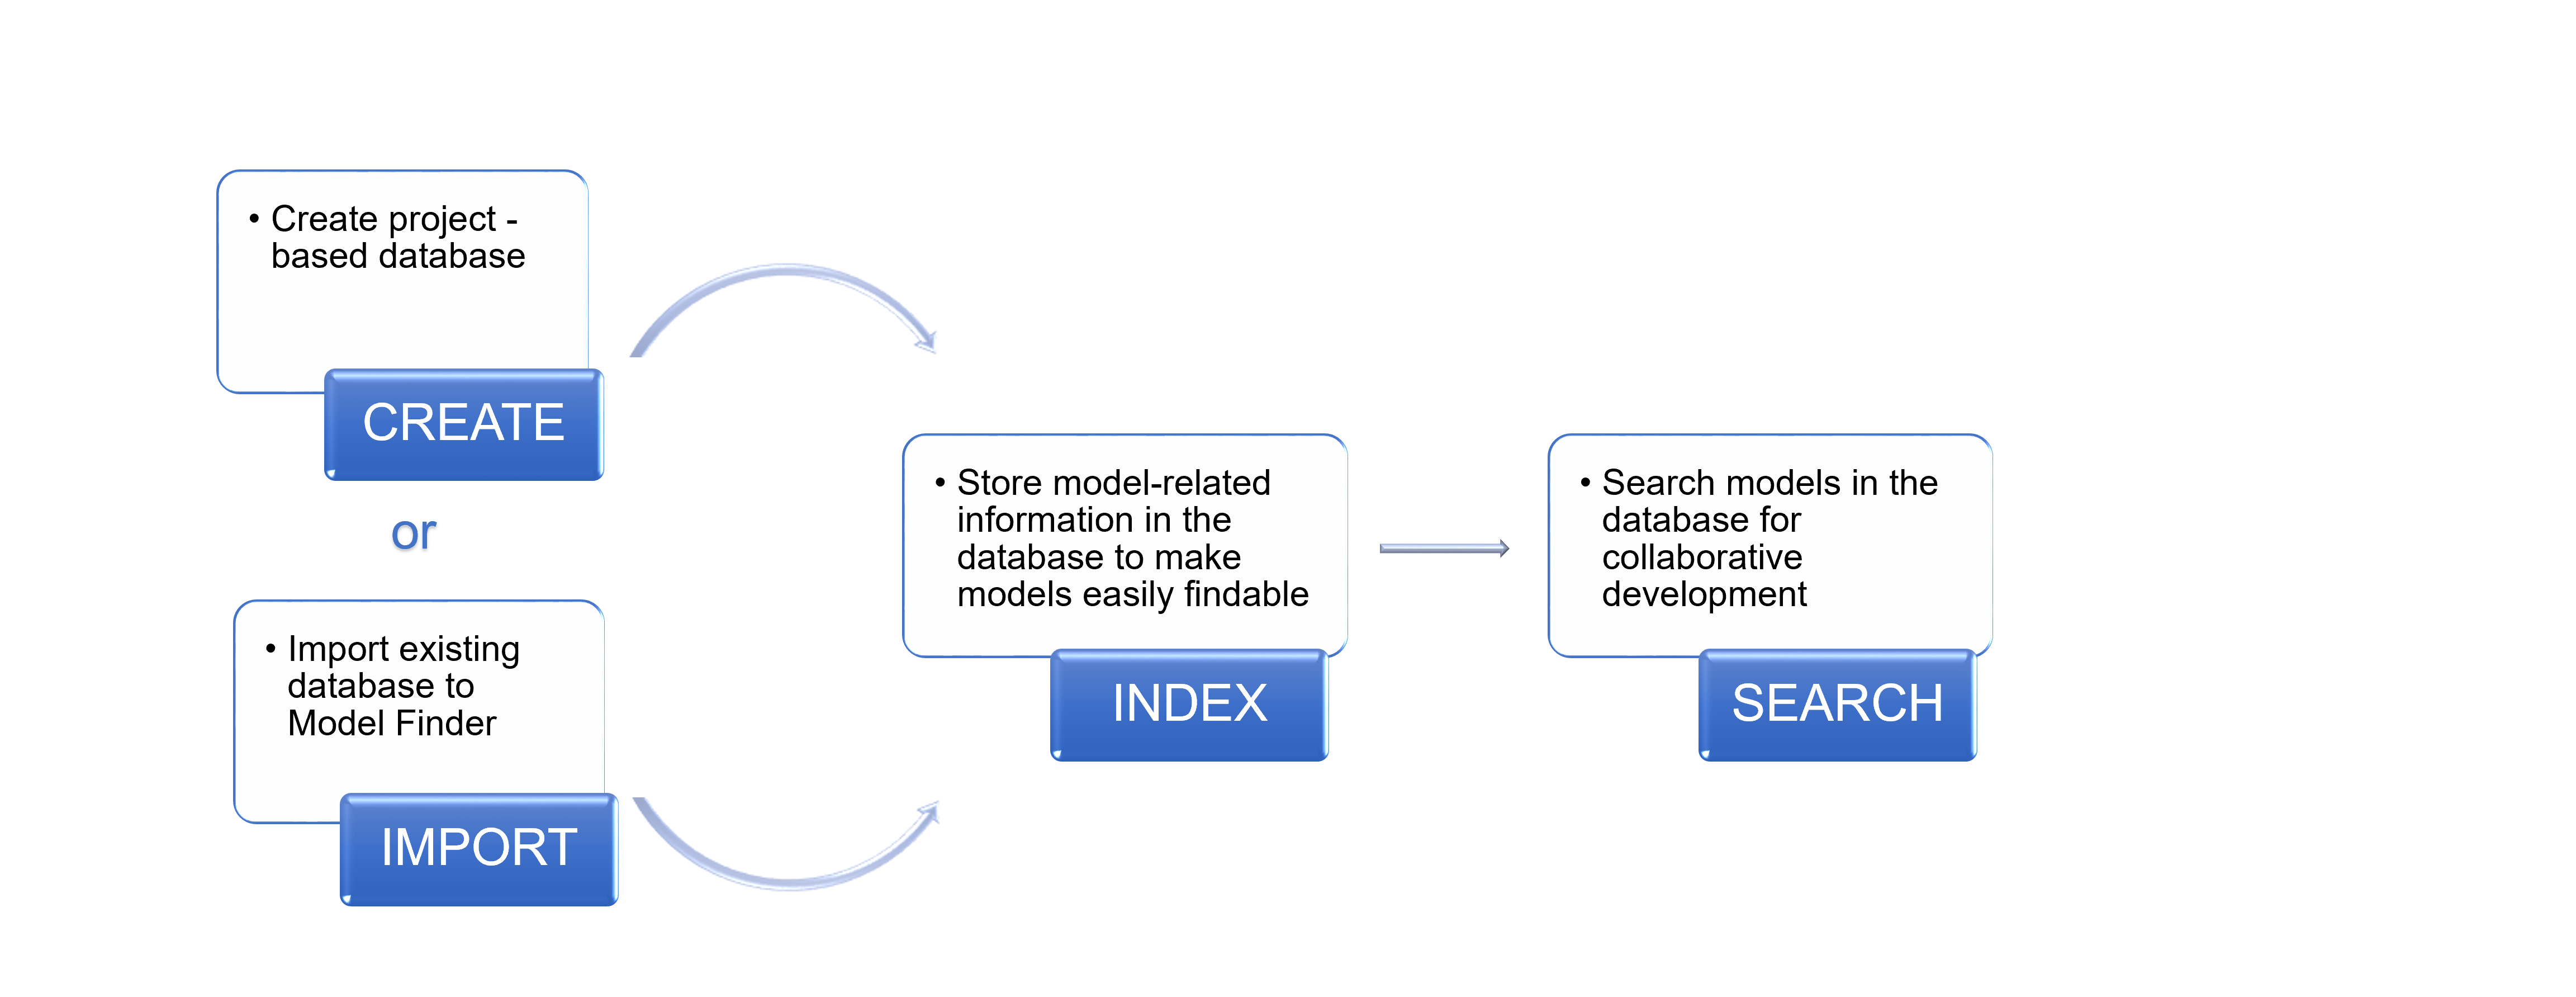 Workflow to use Model Finder